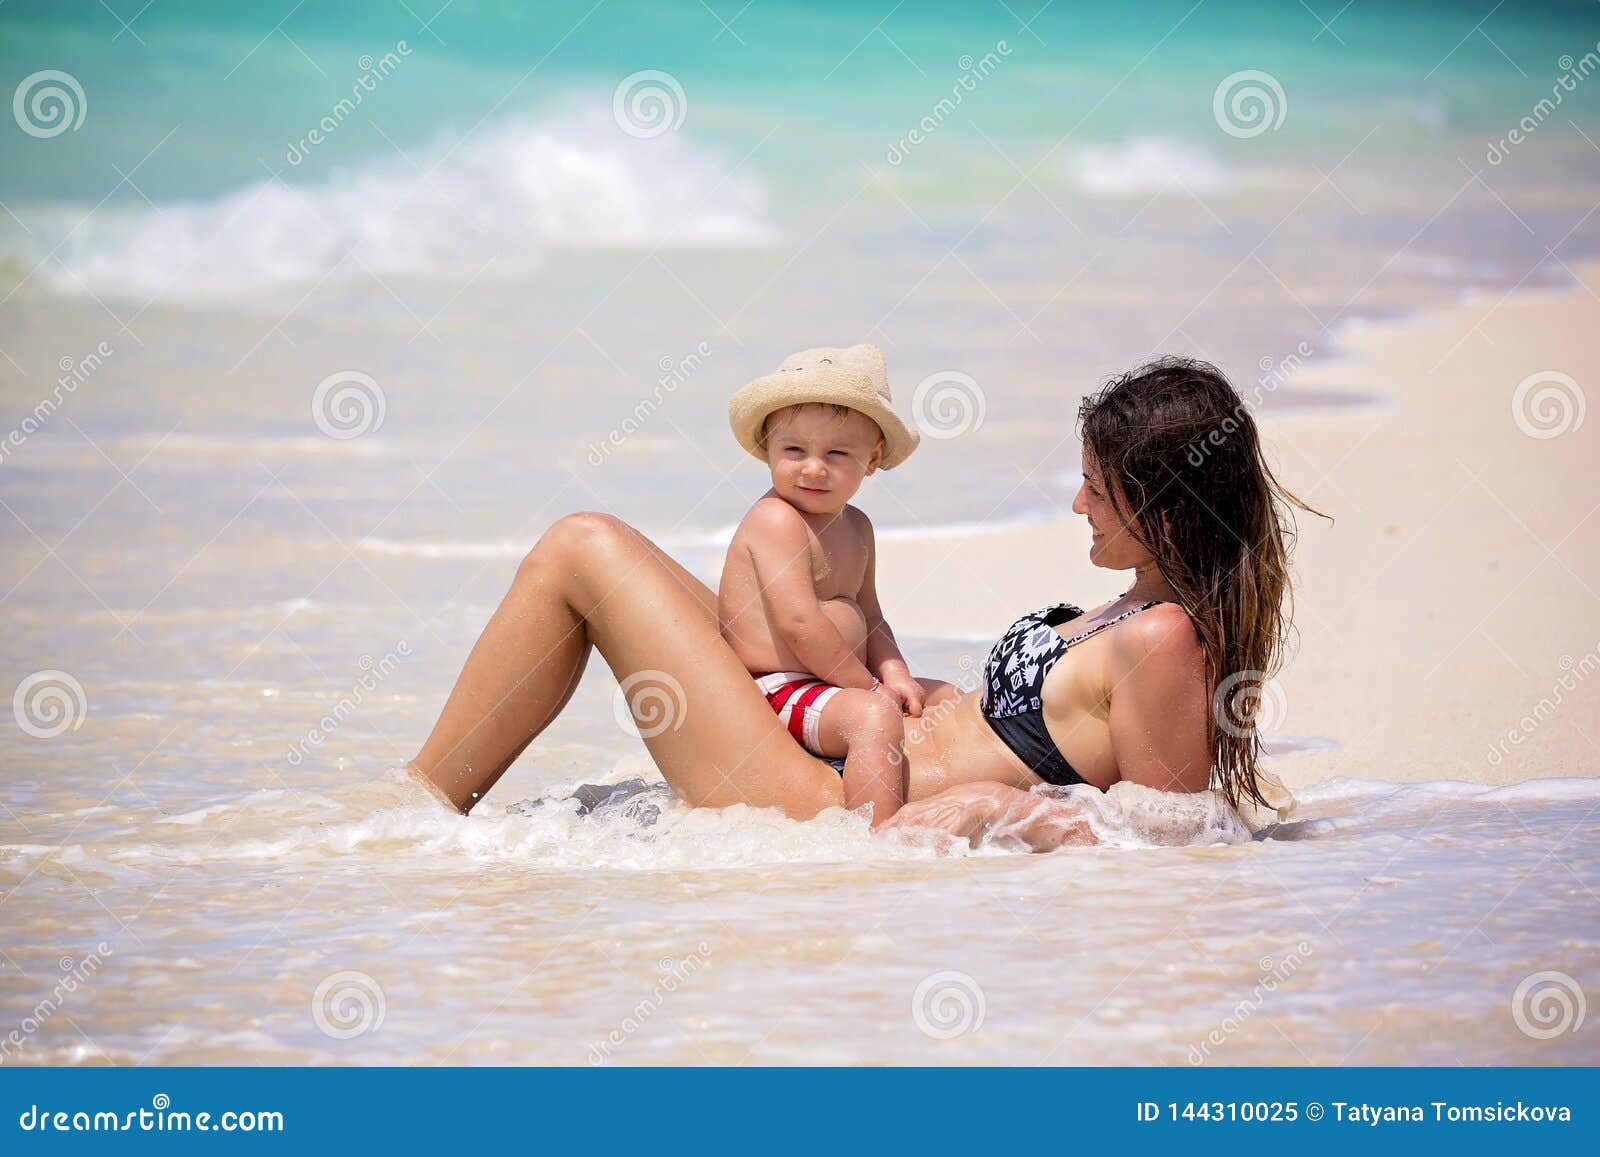 Mother and Child Playing at Tropical Beach. Family Sea Summer